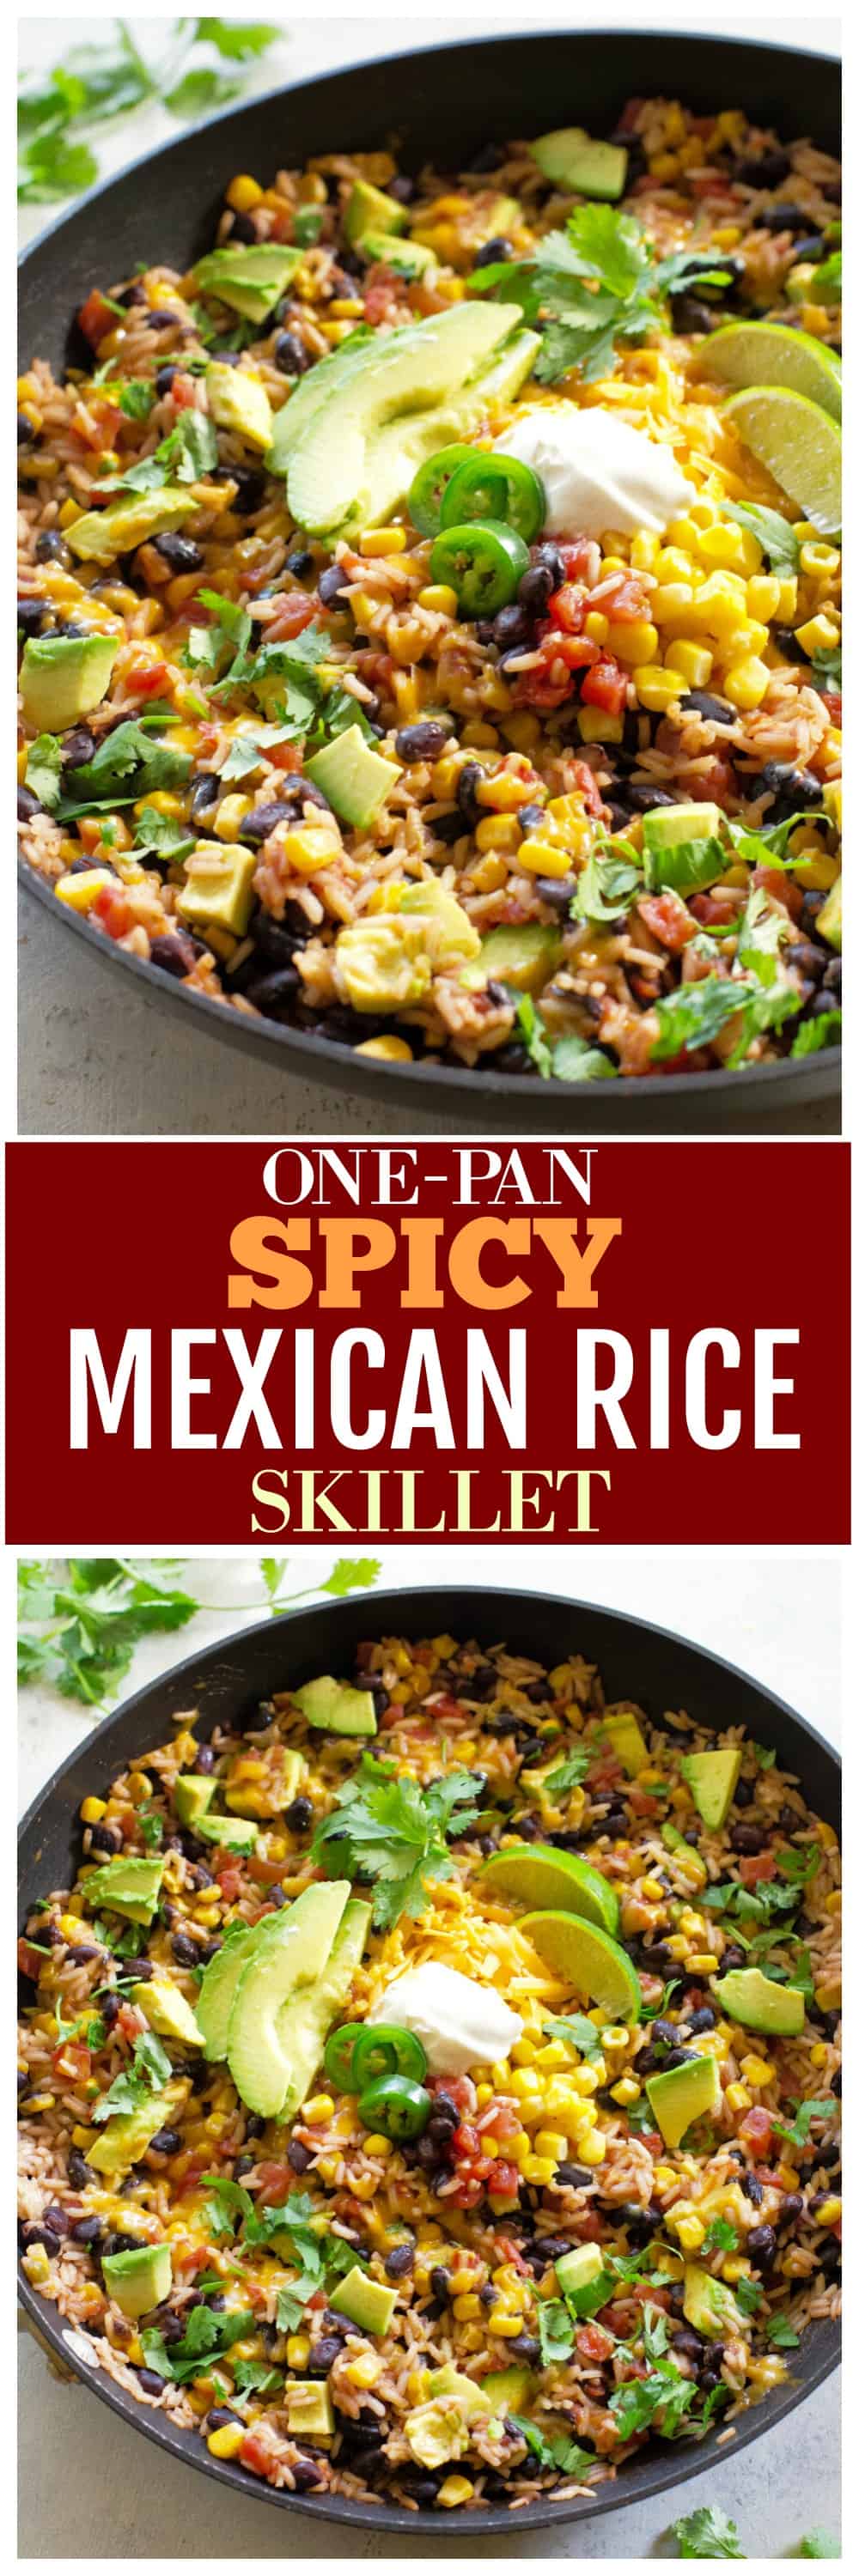 One-Pan Spicy Mexican Rice Skillet - The Girl Who Ate Everything